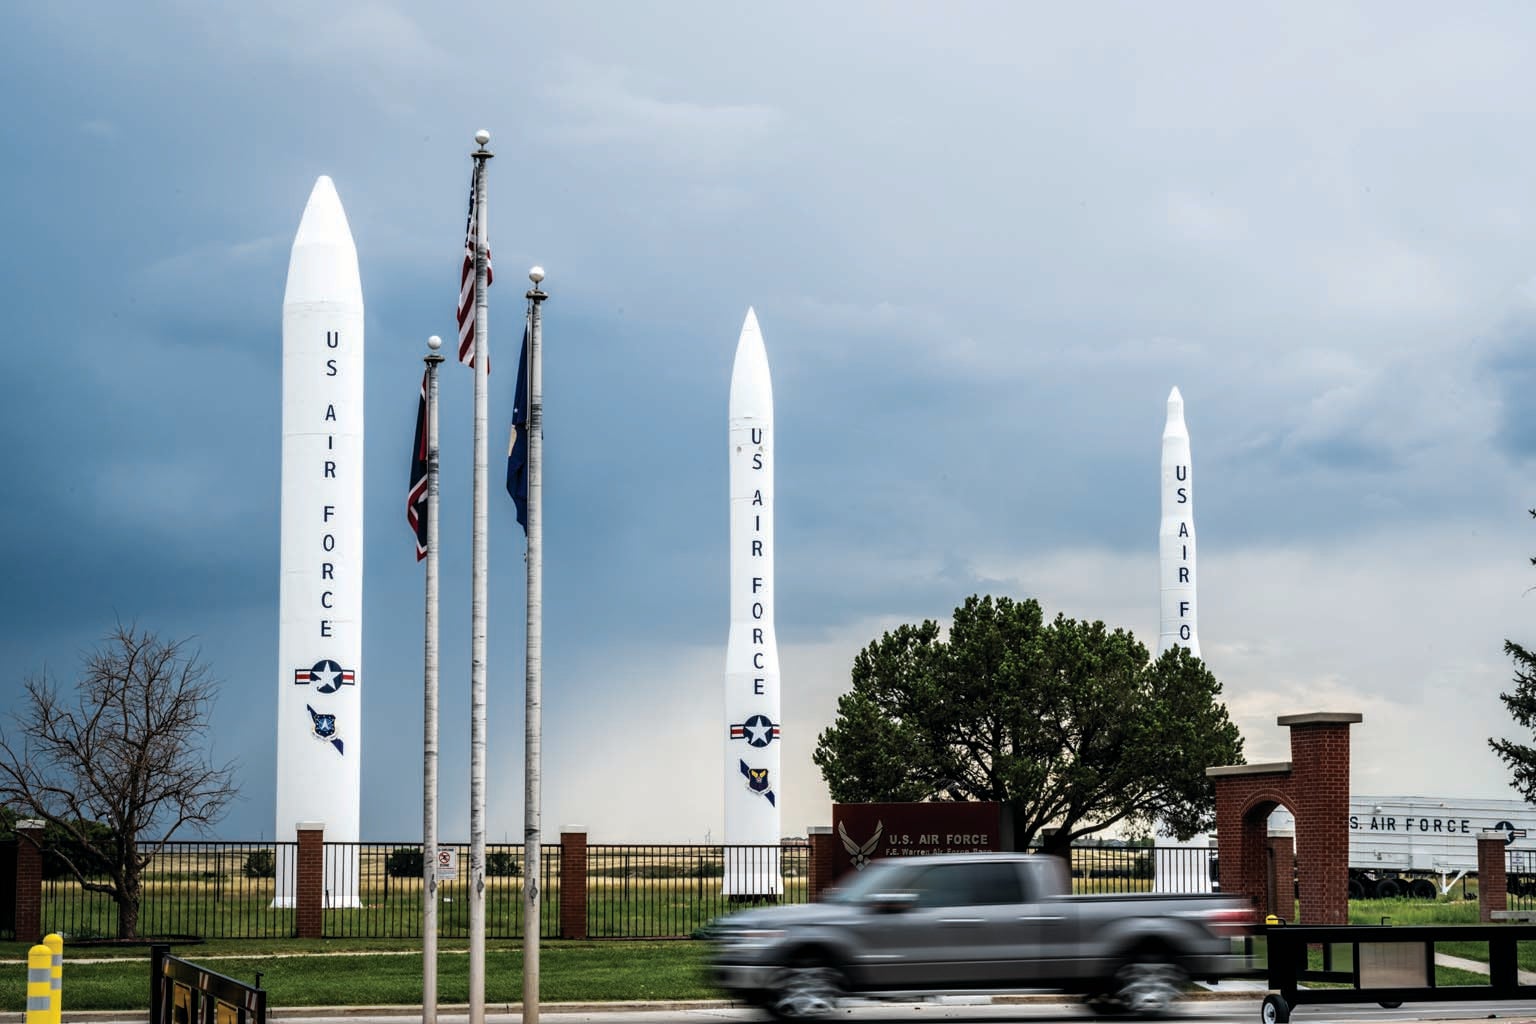 Three missiles shown on display on a lawn.